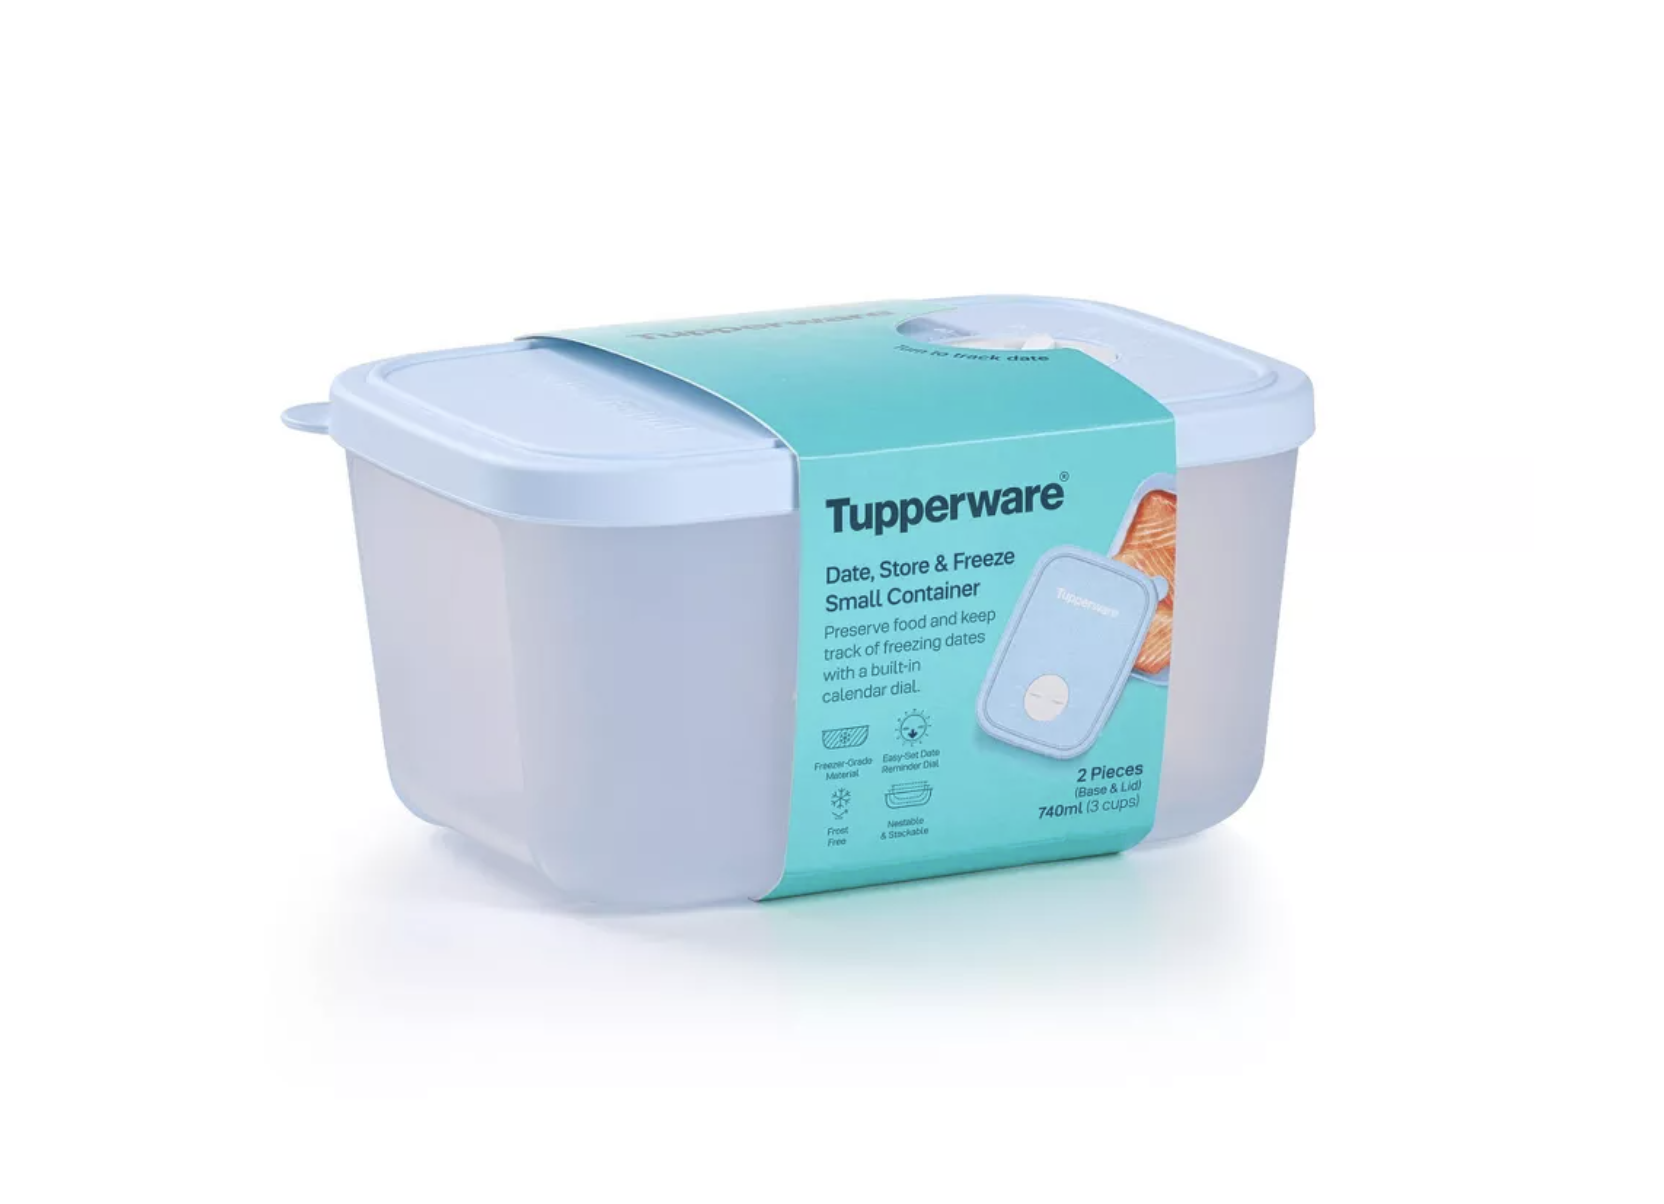 https://thekrazycouponlady.com/wp-content/uploads/2023/03/target-tupperware-date-store-freeze-container-2023-1678475279-1678475279.png